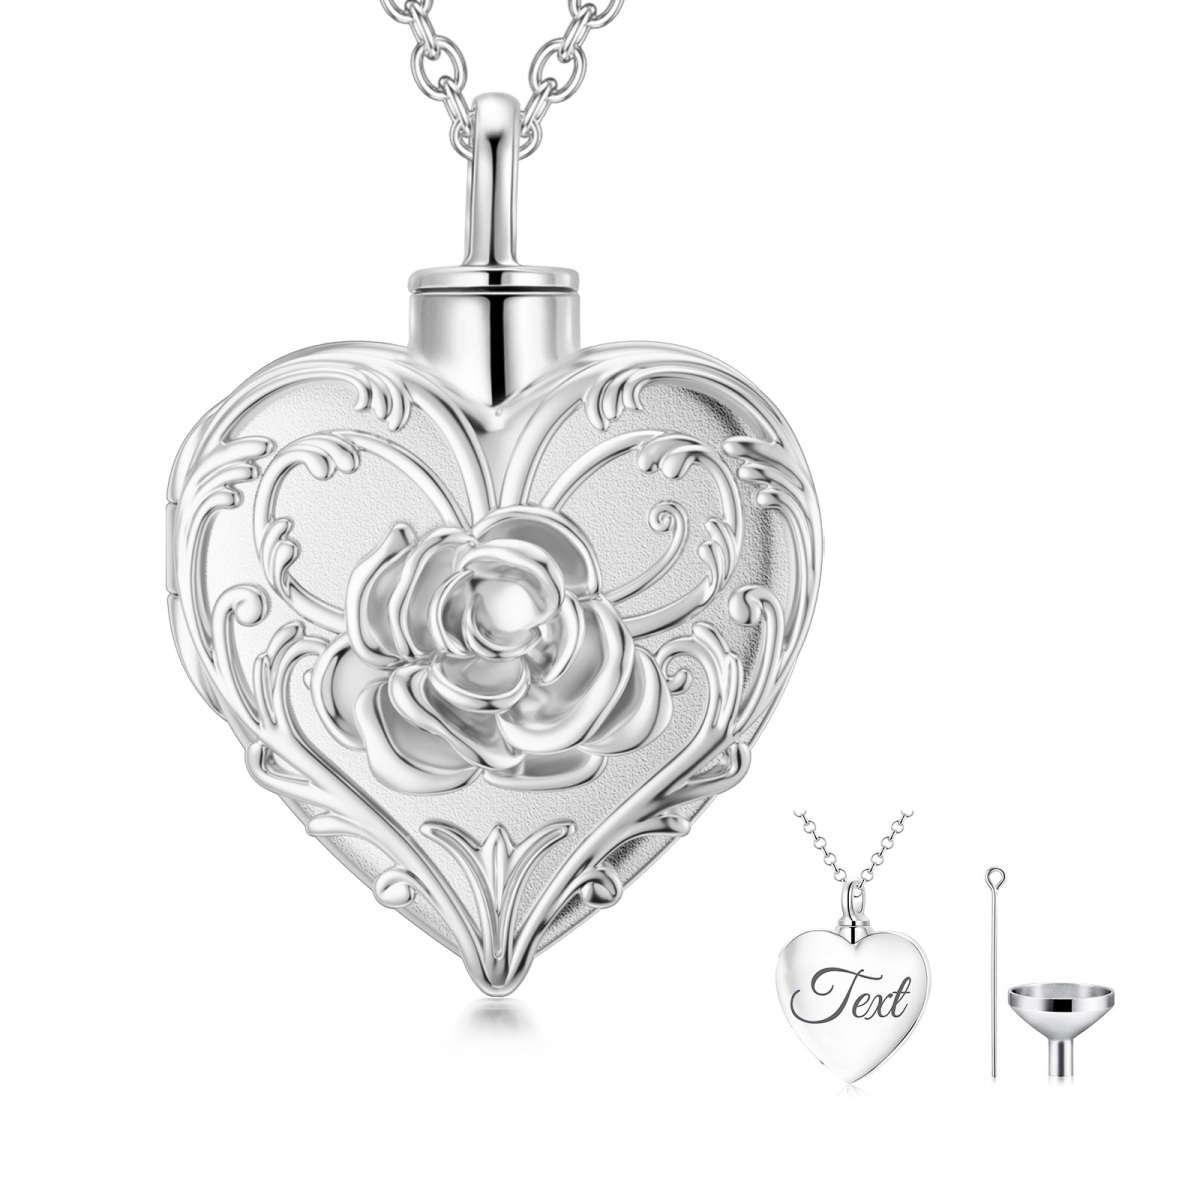 10K White Gold Rose Heart Personalized Engraving Urn Necklace for Ashes with Engraved Word-1